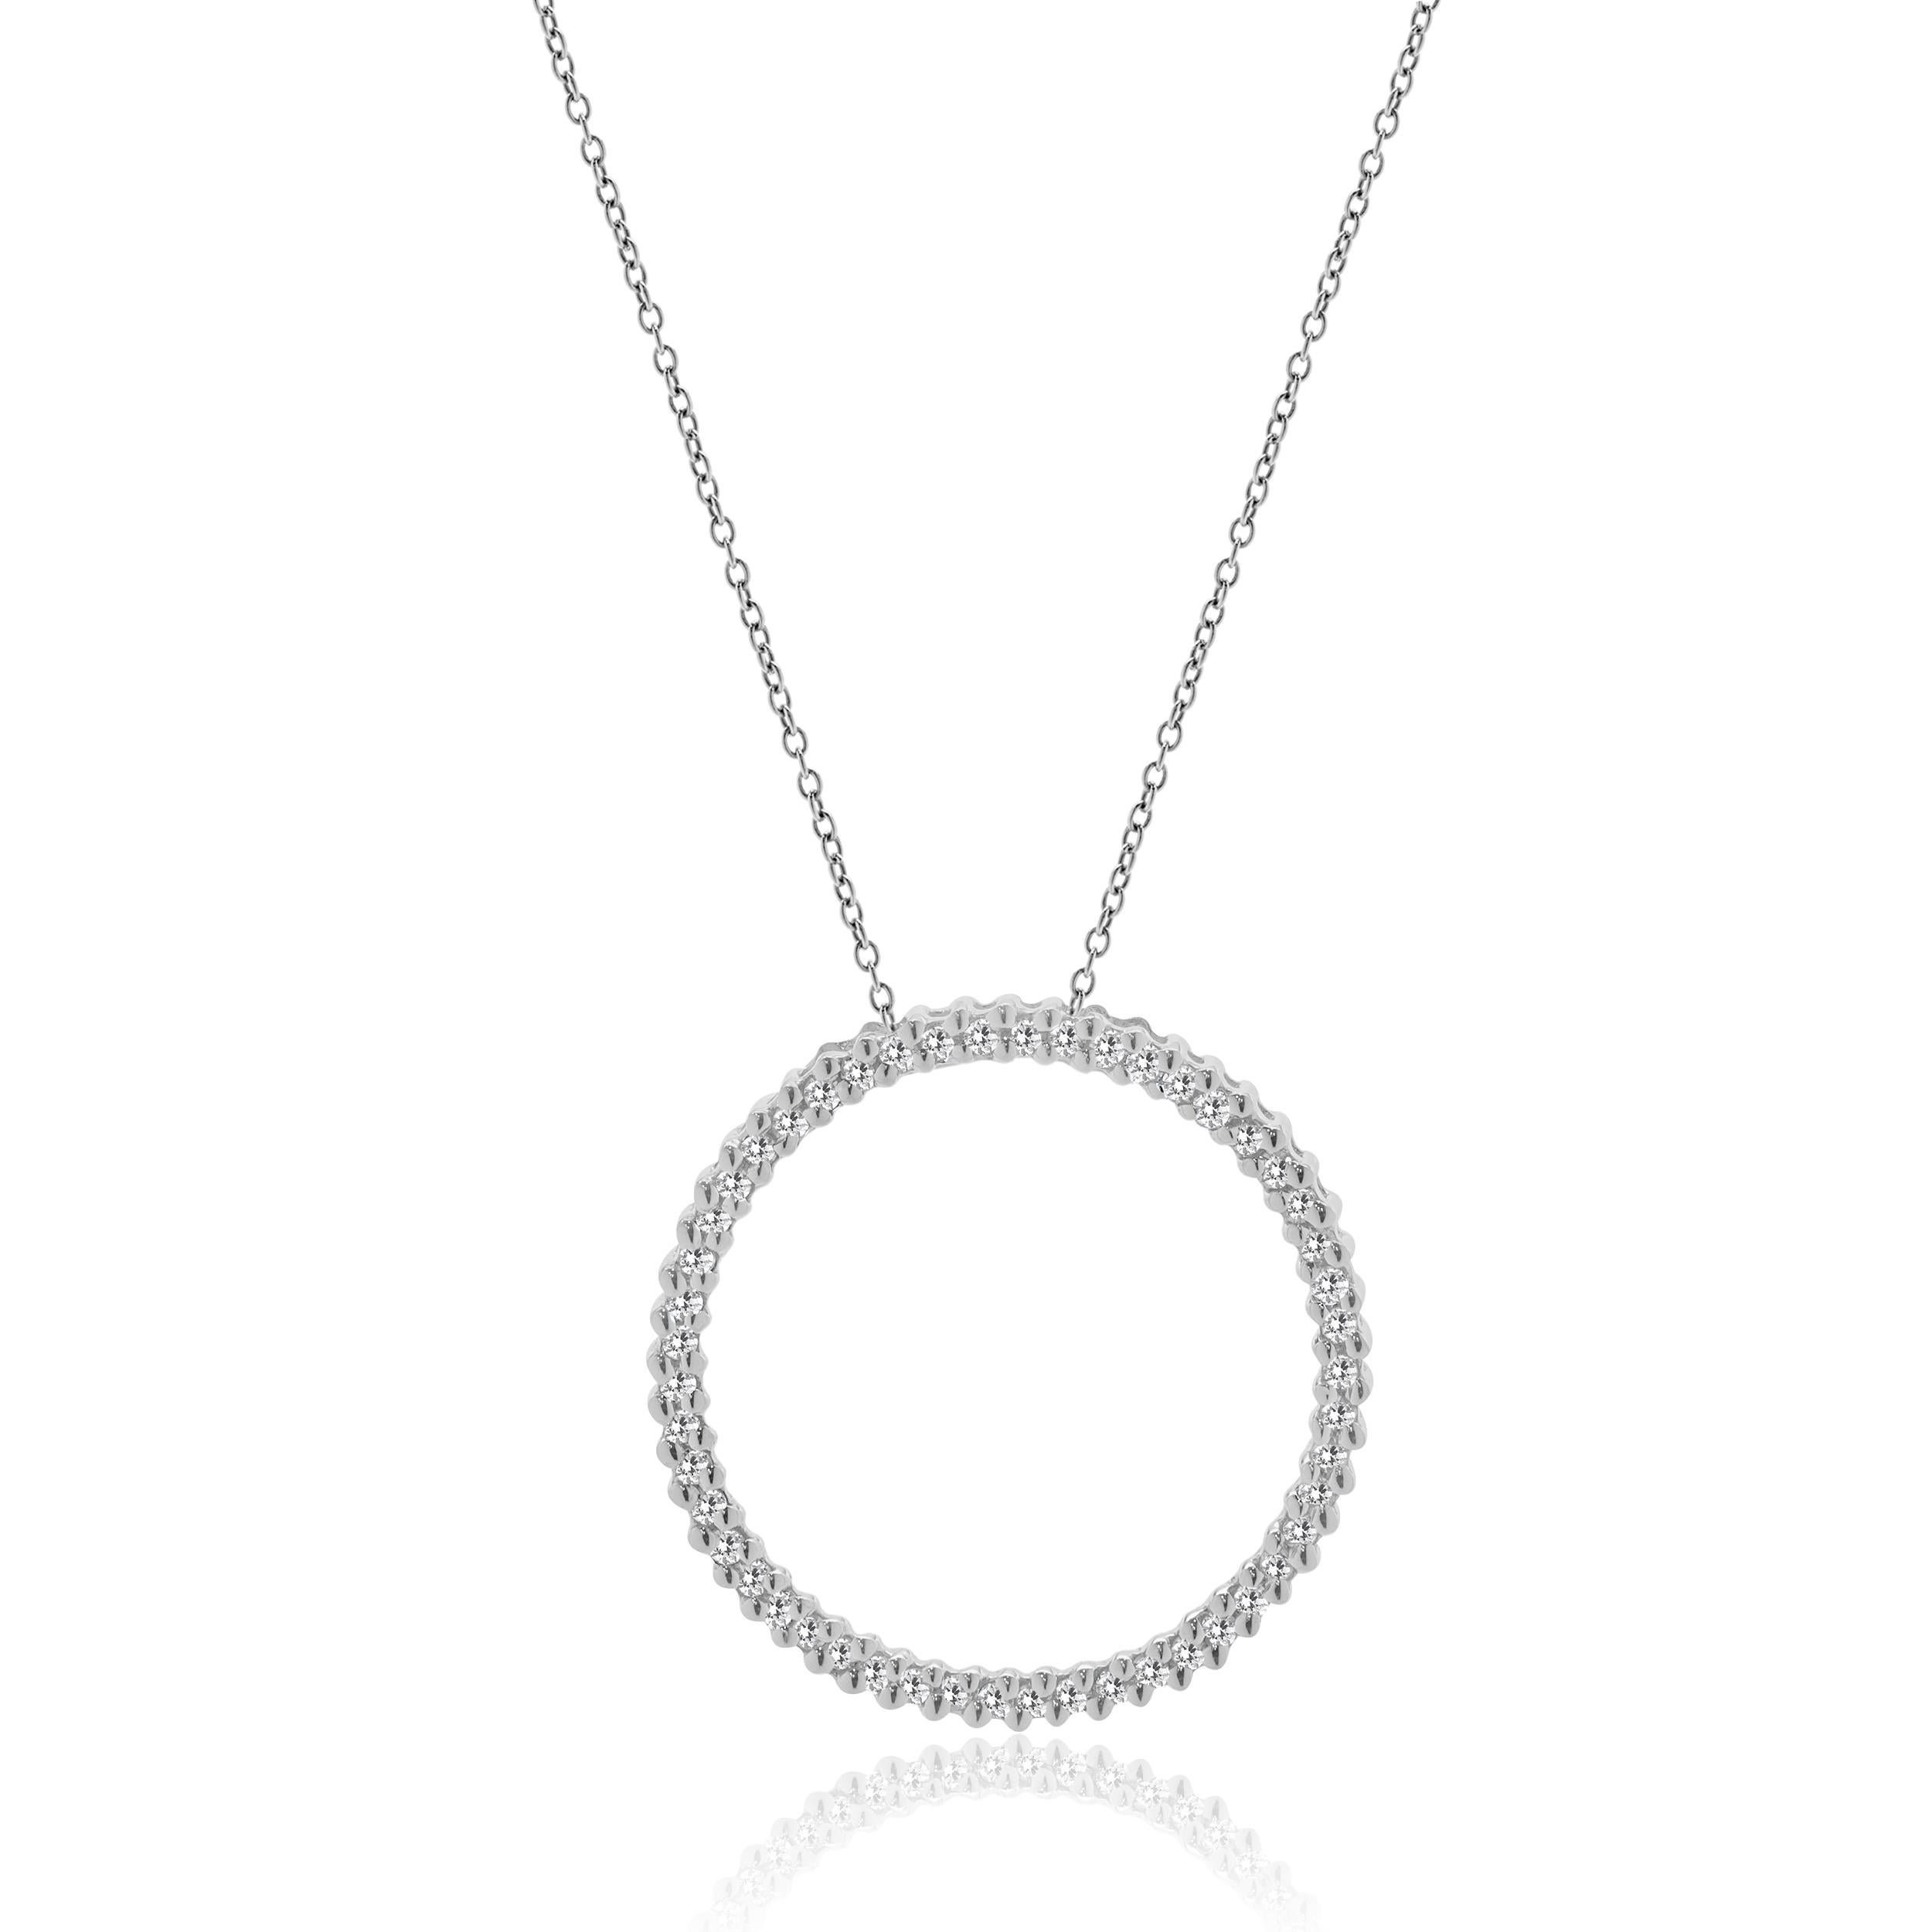 Designer: custom
Material: 14K white gold
Diamonds: 51 round brilliant cut = 0.20cttw
Color: G
Clarity: SI2-I1
Dimensions: necklace measures 18.25-inches in length 
Weight: 2.51 grams
